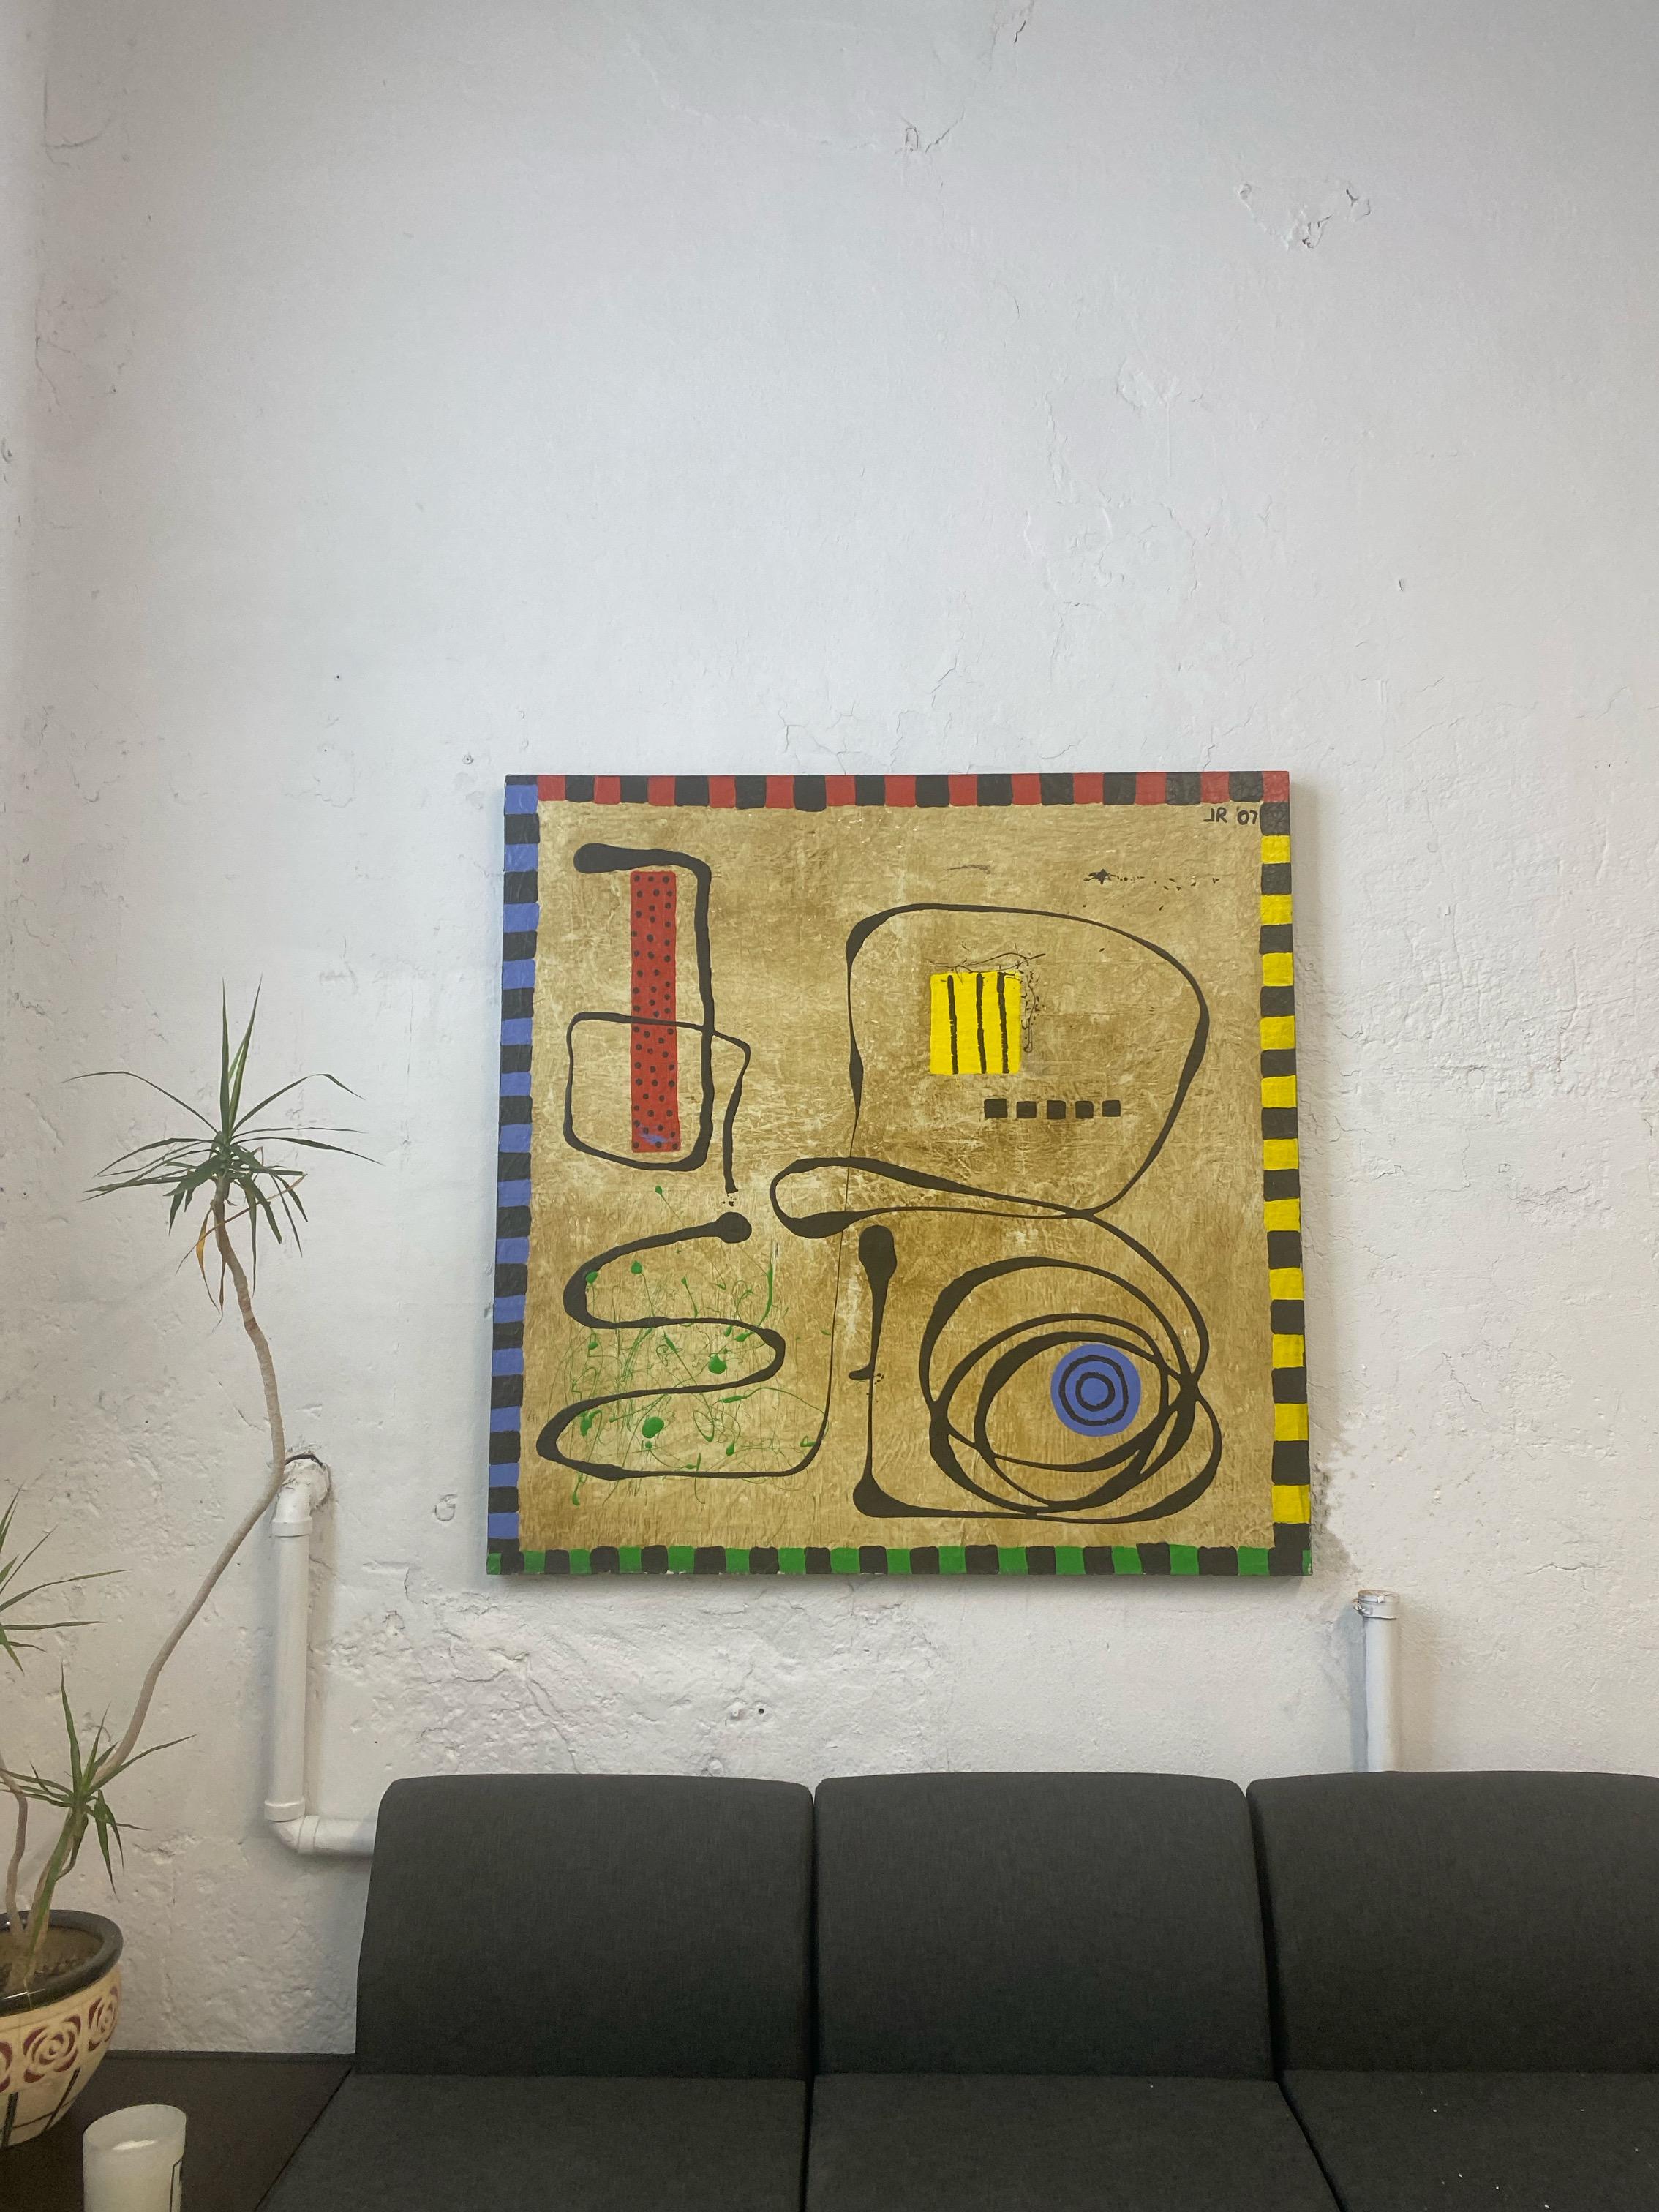 Original painting by artist JR- 2007
Signed. 

A beautiful brutalist painting. 
This piece of art is lightweight and measures 48” on all sides. 

The painting is slightly textured and is the perfect statement piece to add colour to a room or